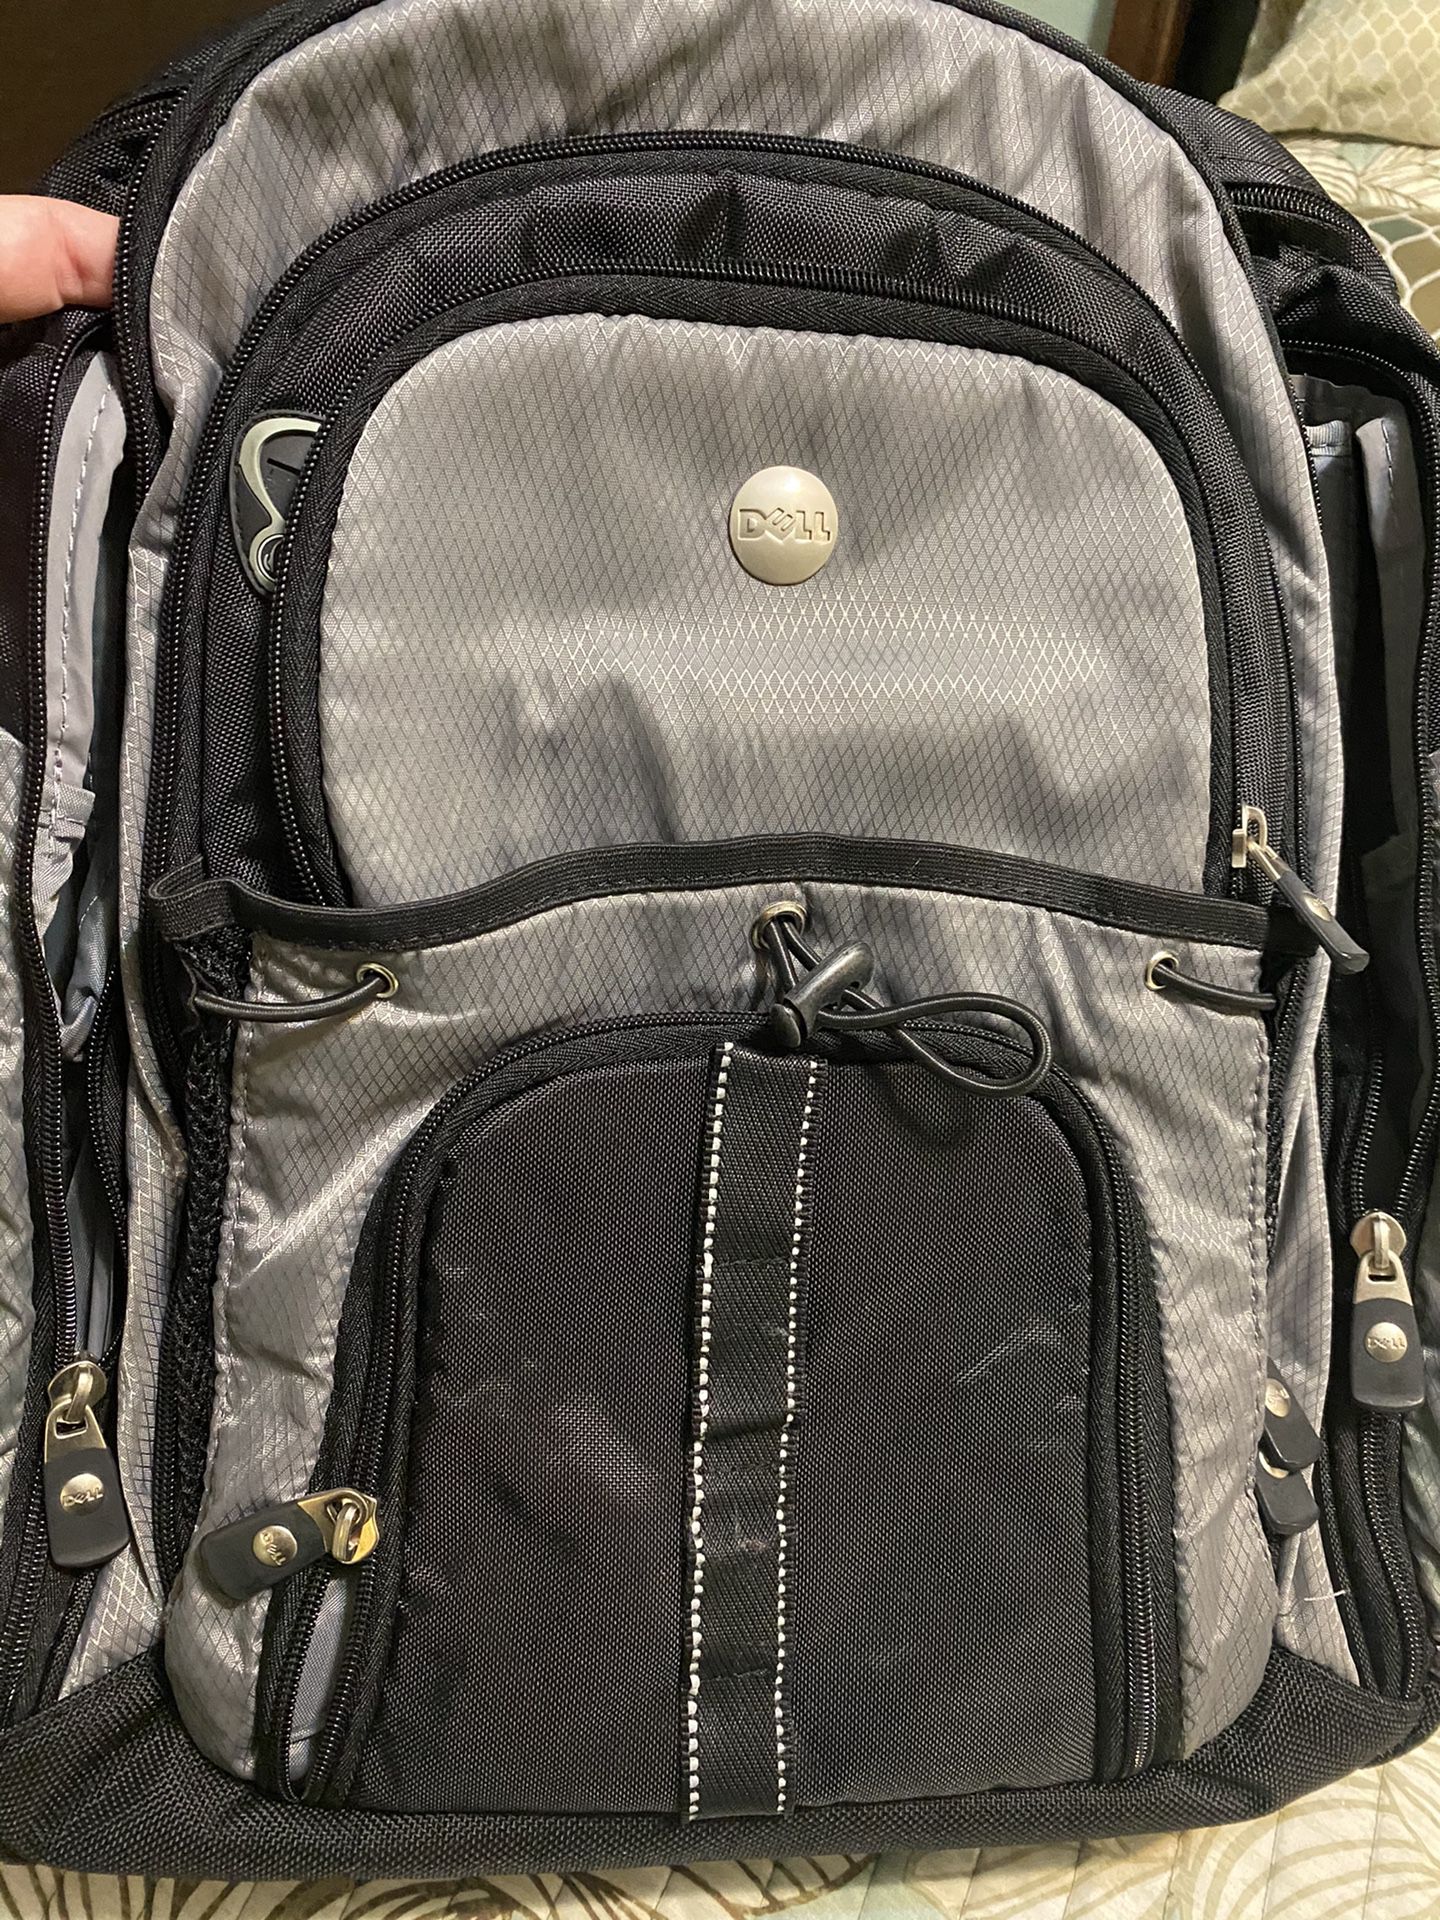 Dell backpack